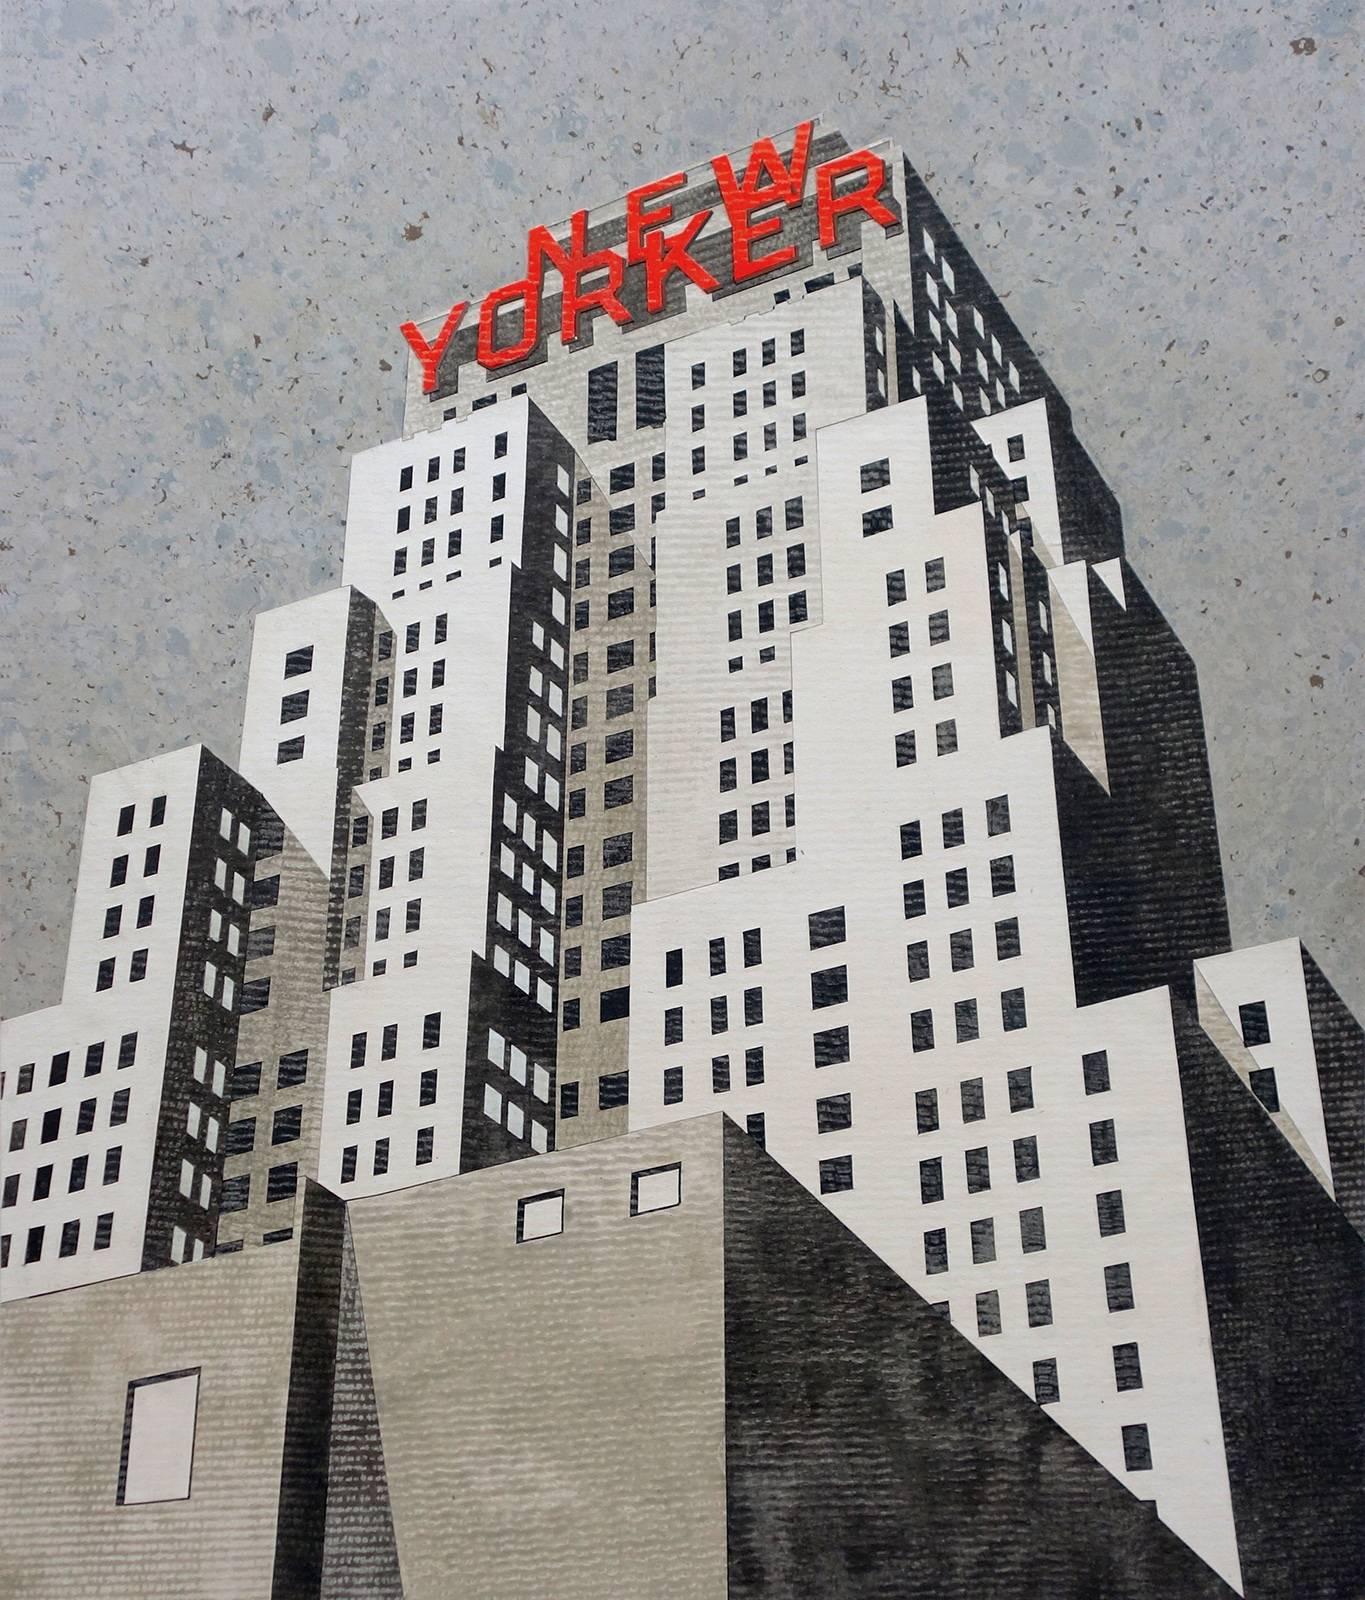 New Yorker #2 - Mixed Media Art by William Steiger